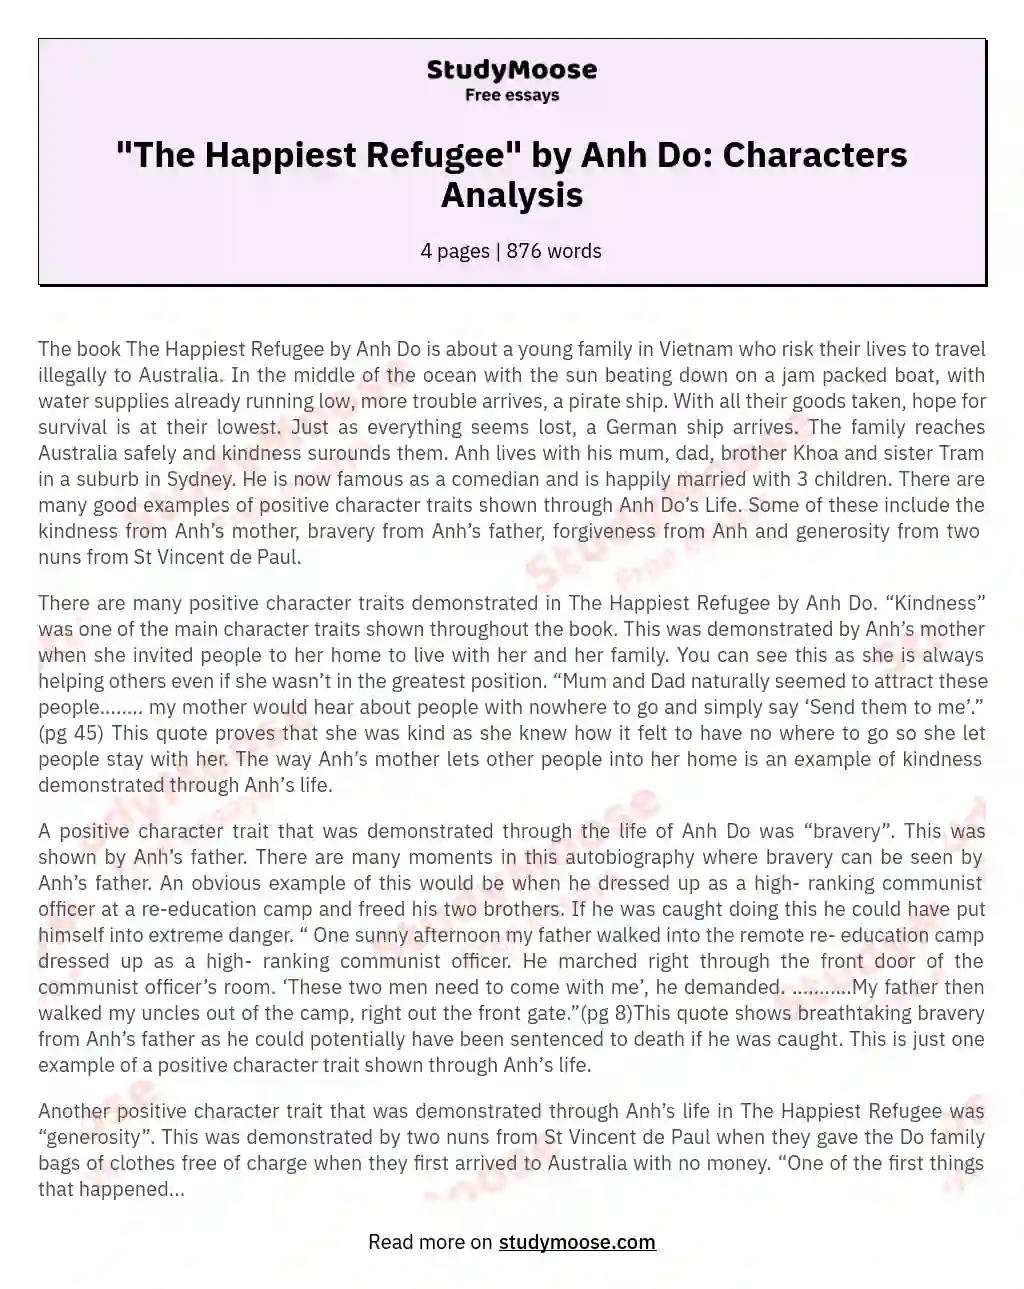 "The Happiest Refugee" by Anh Do: Characters Analysis essay